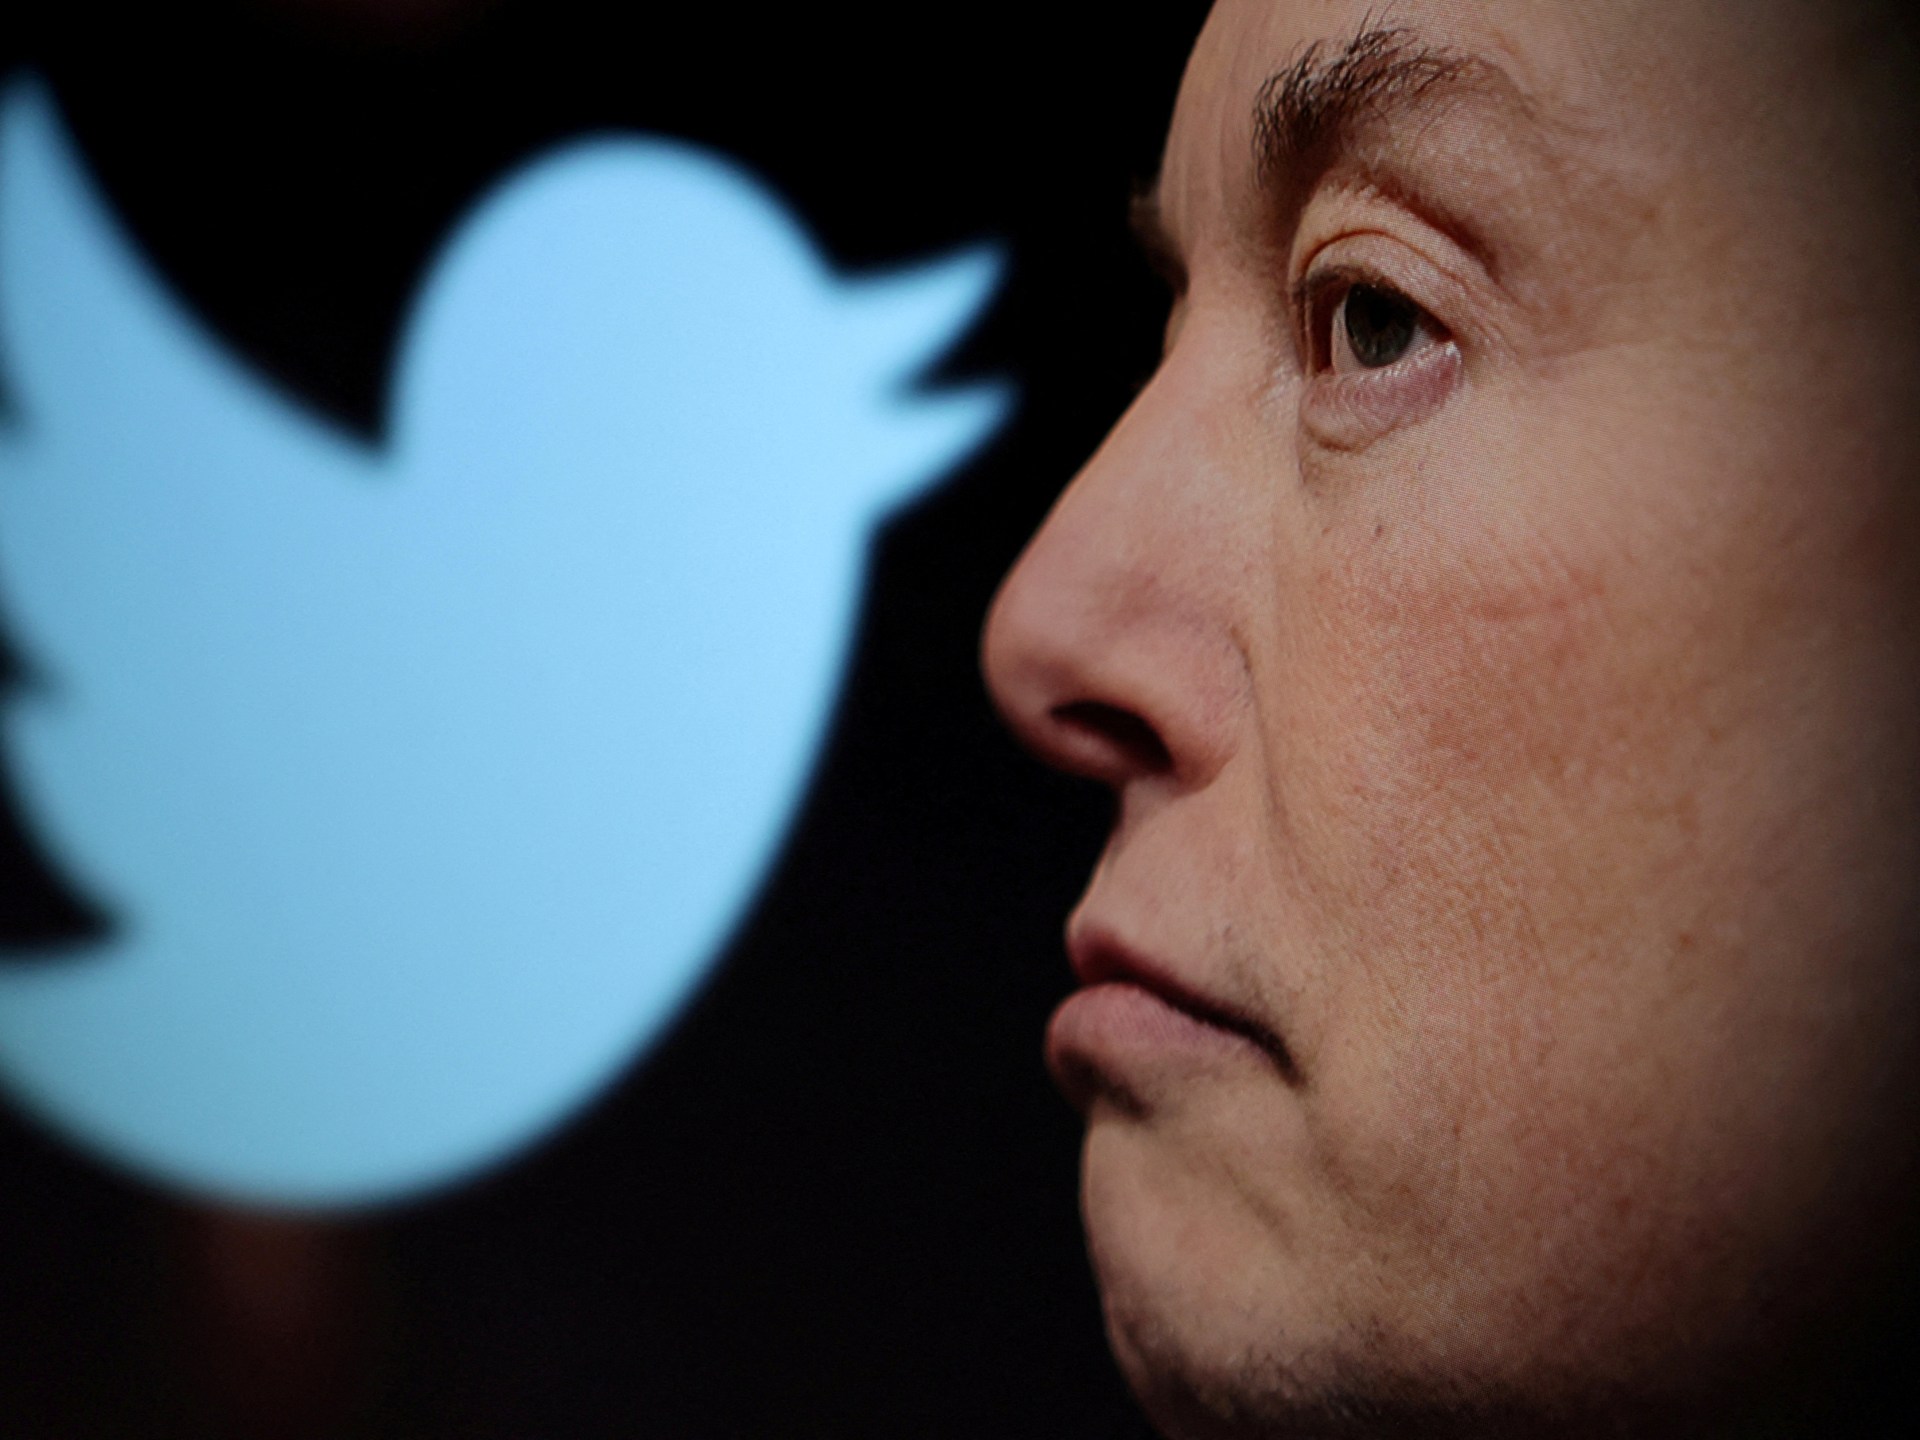 Musk aiming to charge for Twitter check mark from Monday: Reports – Al Jazeera English